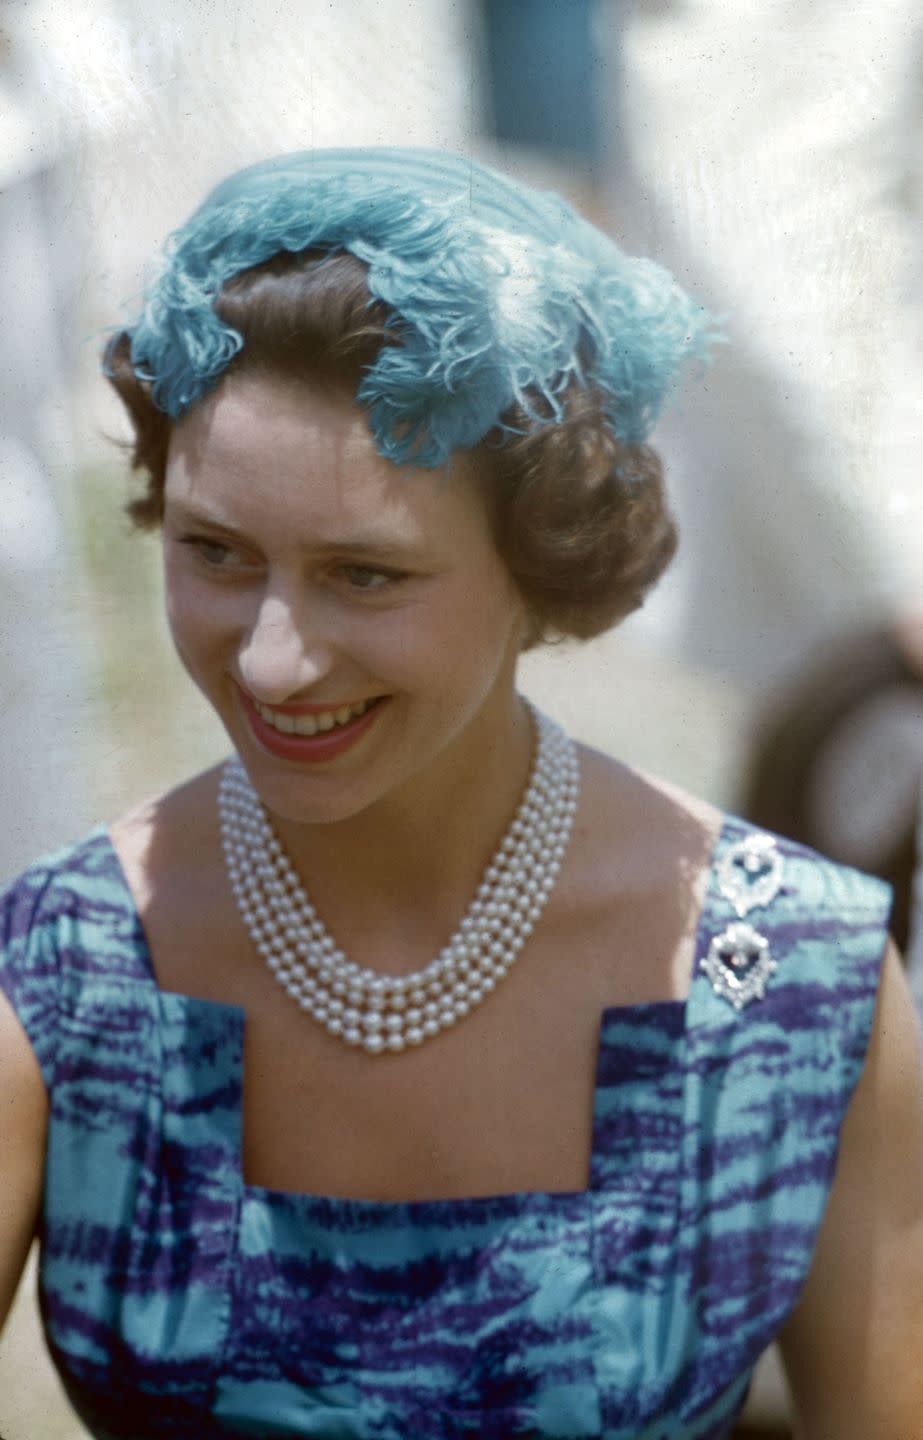 <p>Princess Margaret sports a feathered blue hat, pearls, and patterned dress during her royal tour of East Africa in 1956.</p>